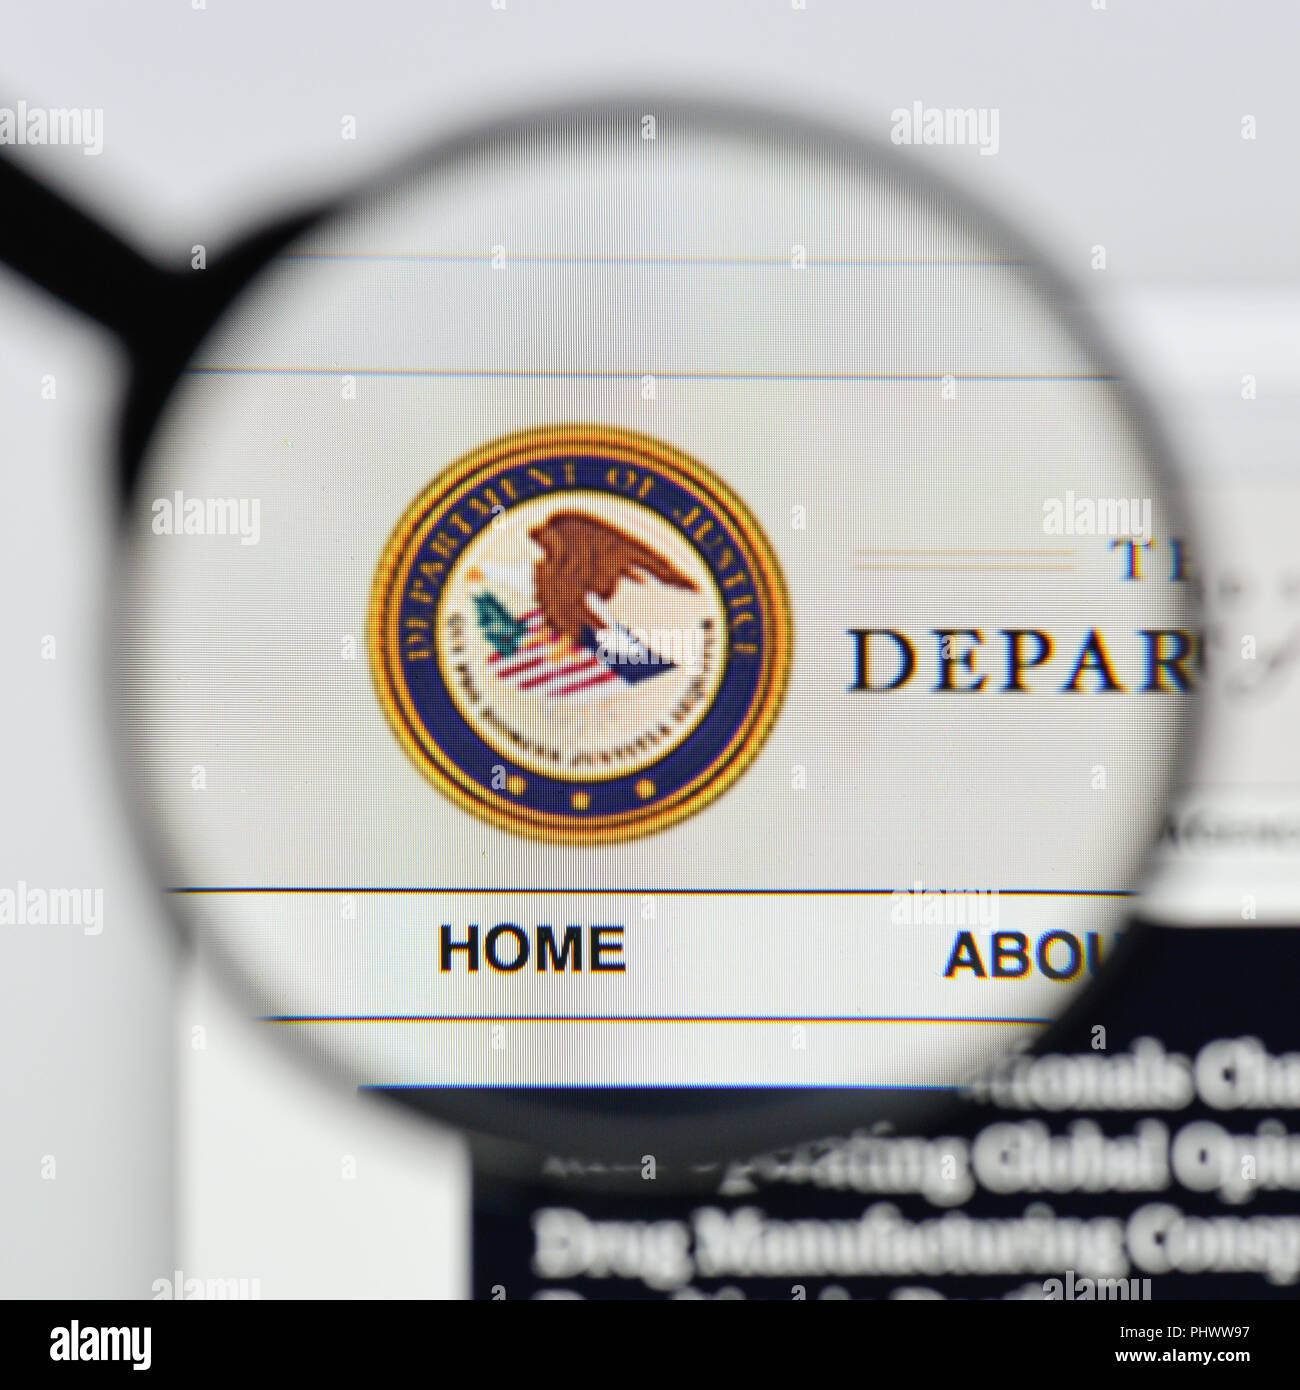 Milan, Italy - August 20, 2018: Justice Department website homepage. Justice Department logo visible. Stock Photo